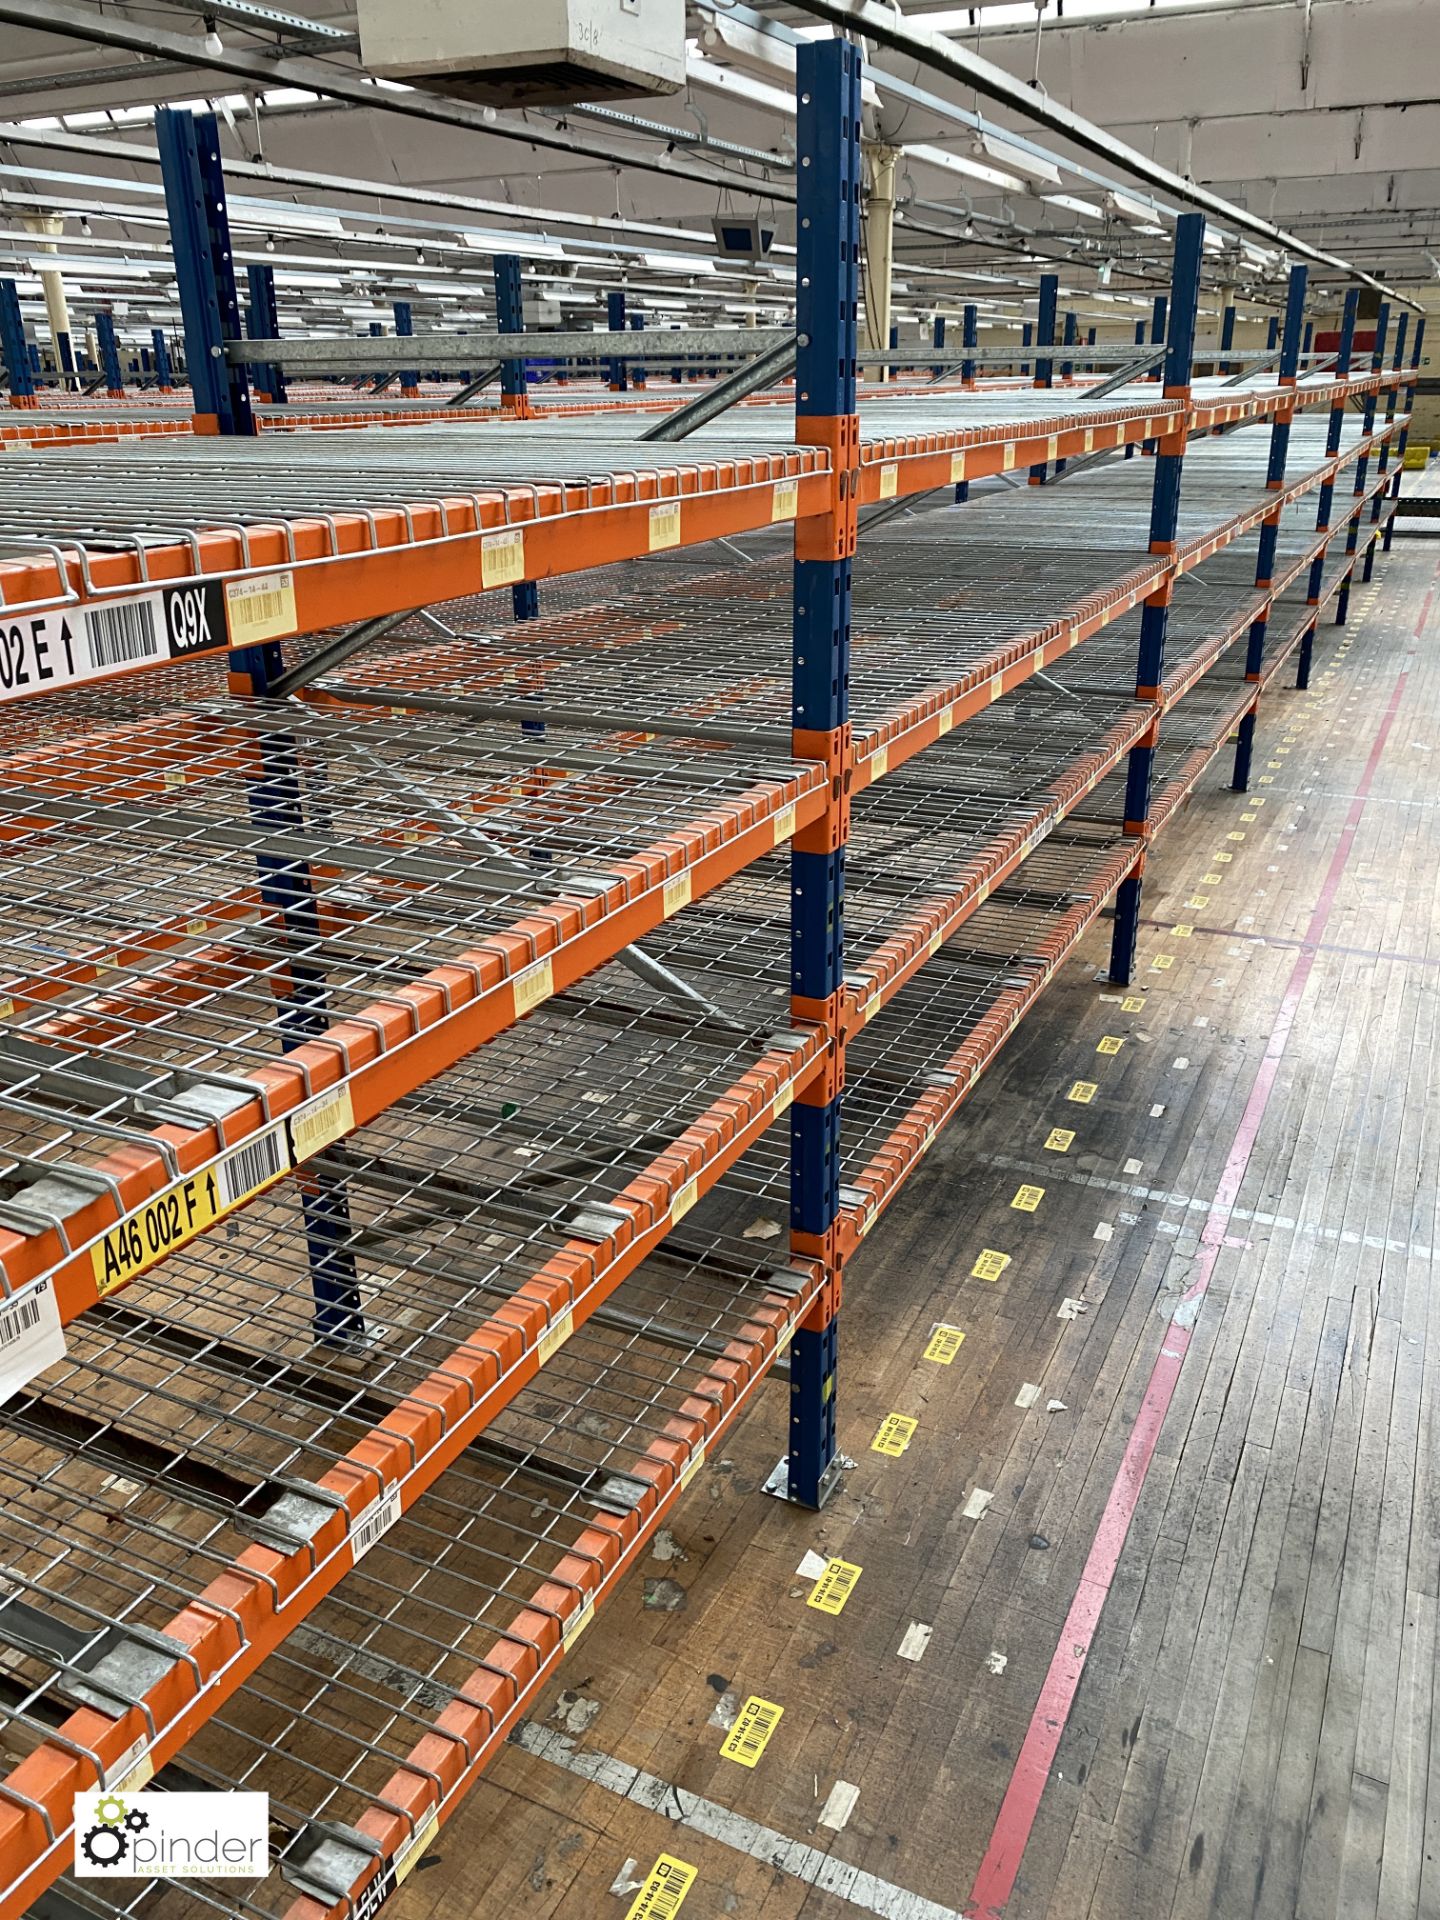 7 bays PSS 2K85 16 boltless Stock Racking, comprising 8 uprights 2400mm x 1200mm, 56 beams 2700mm, - Image 3 of 5